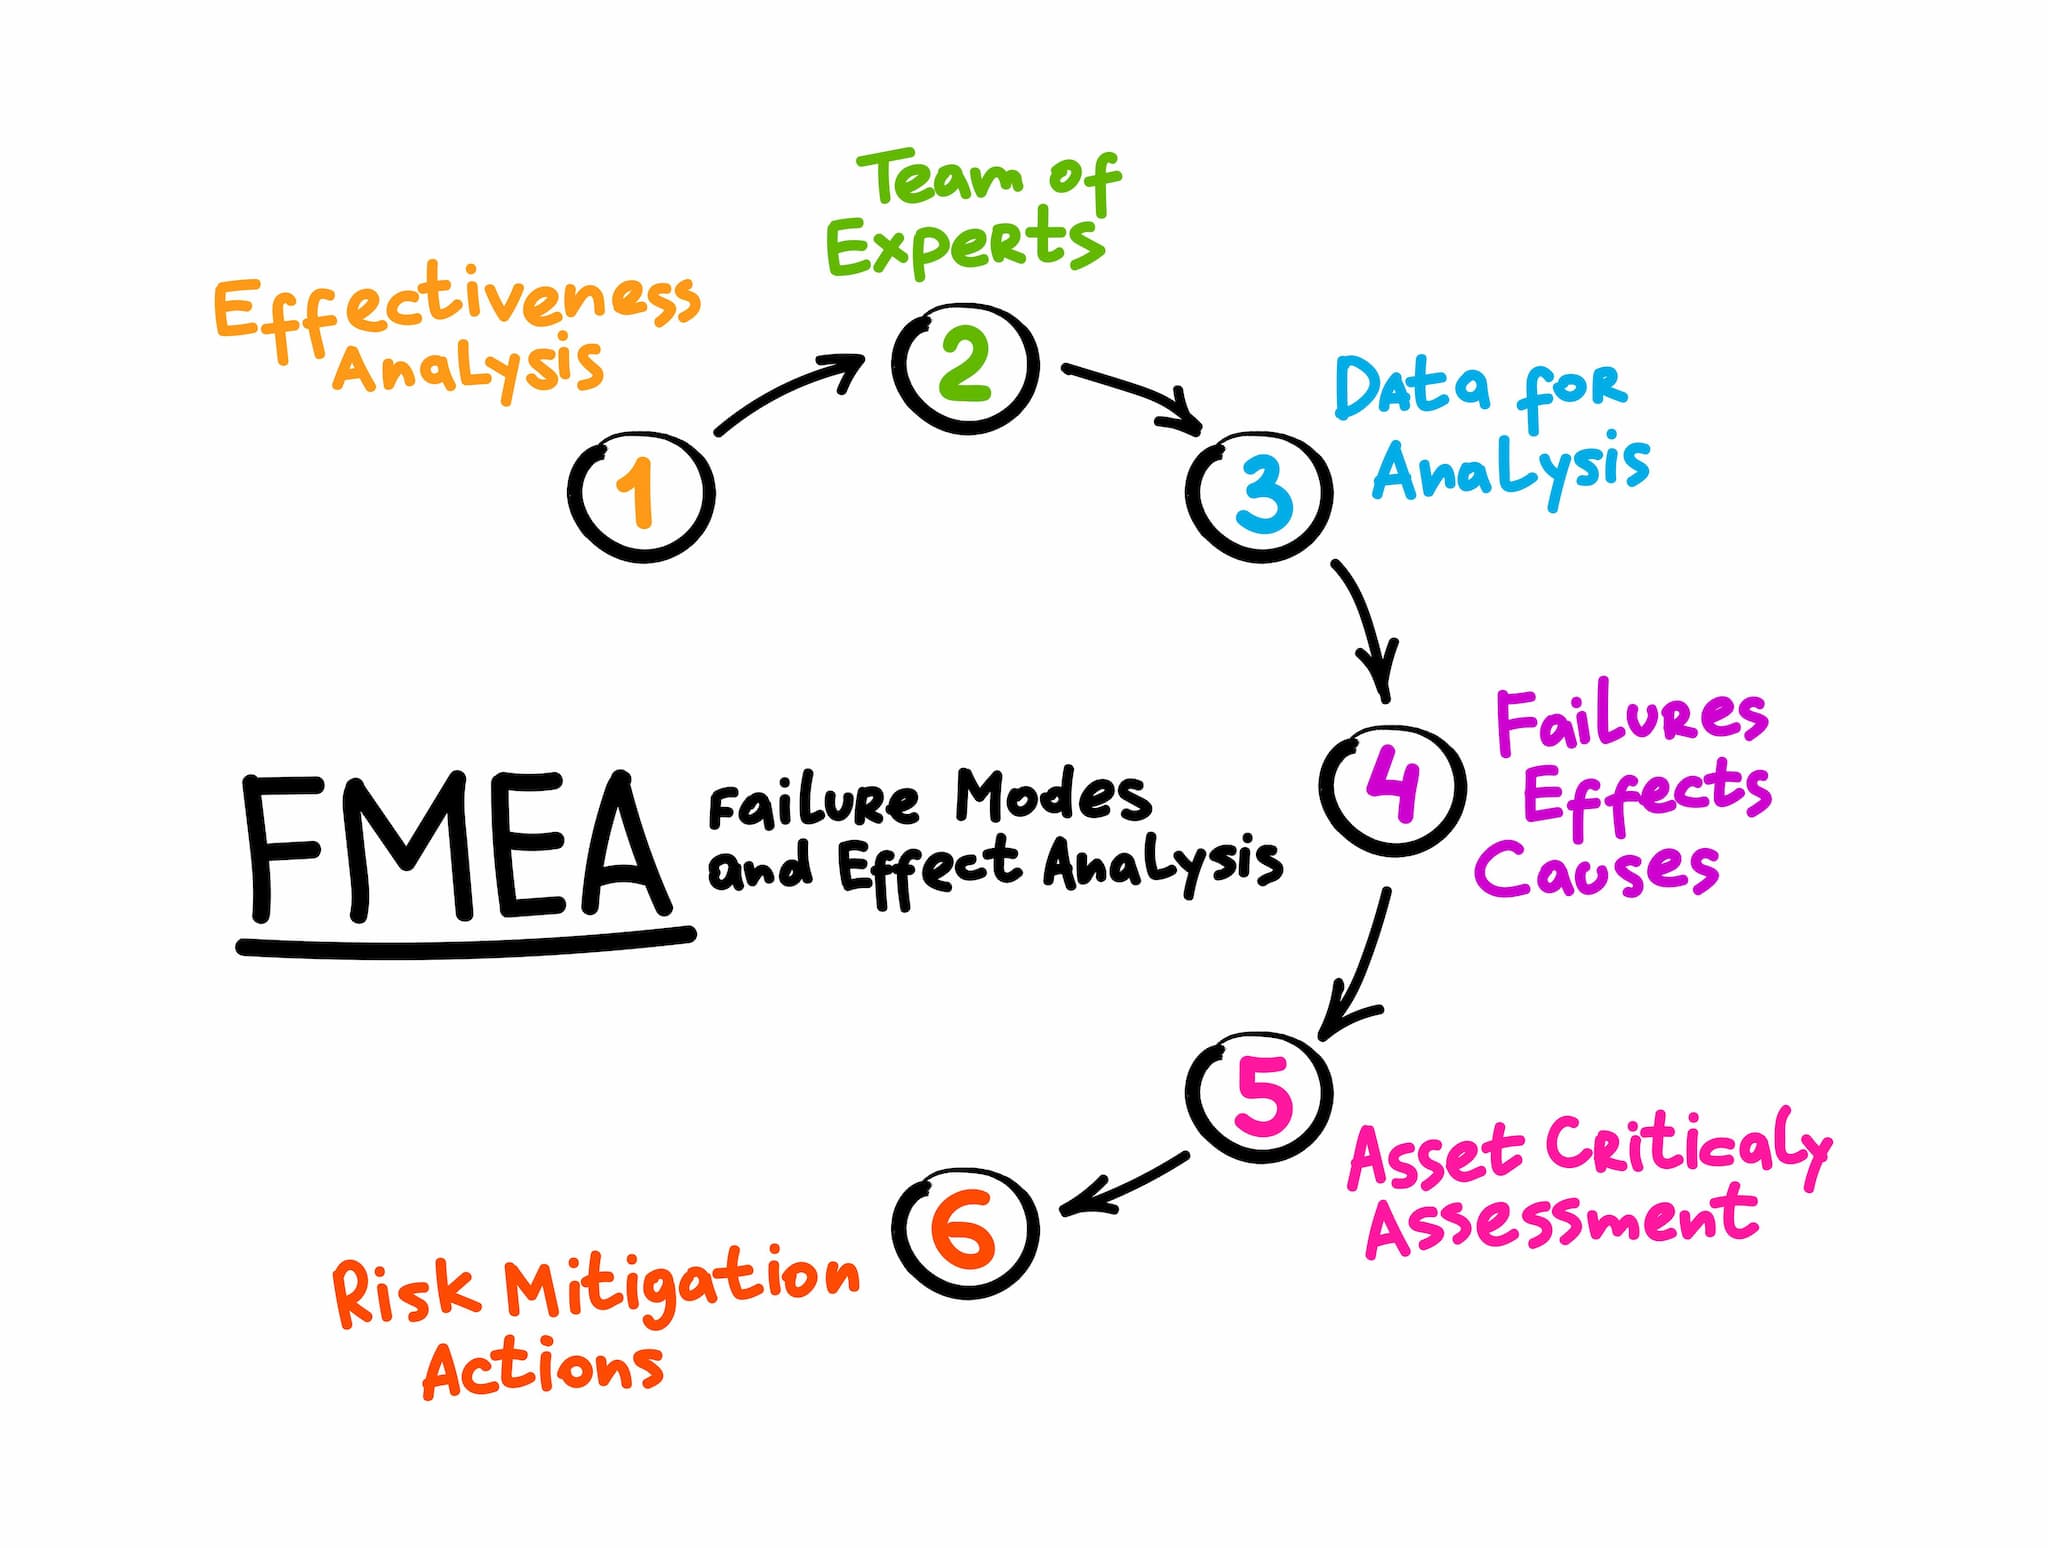 FMEA represented as a rainbow, 1. Effectiveness Analysis, 2. Team of Experts, 3. Data for Analysis, 4. Failures Effects Causes, 5. Asset Criticality Assessment, 6. Risk Mitigation Actions